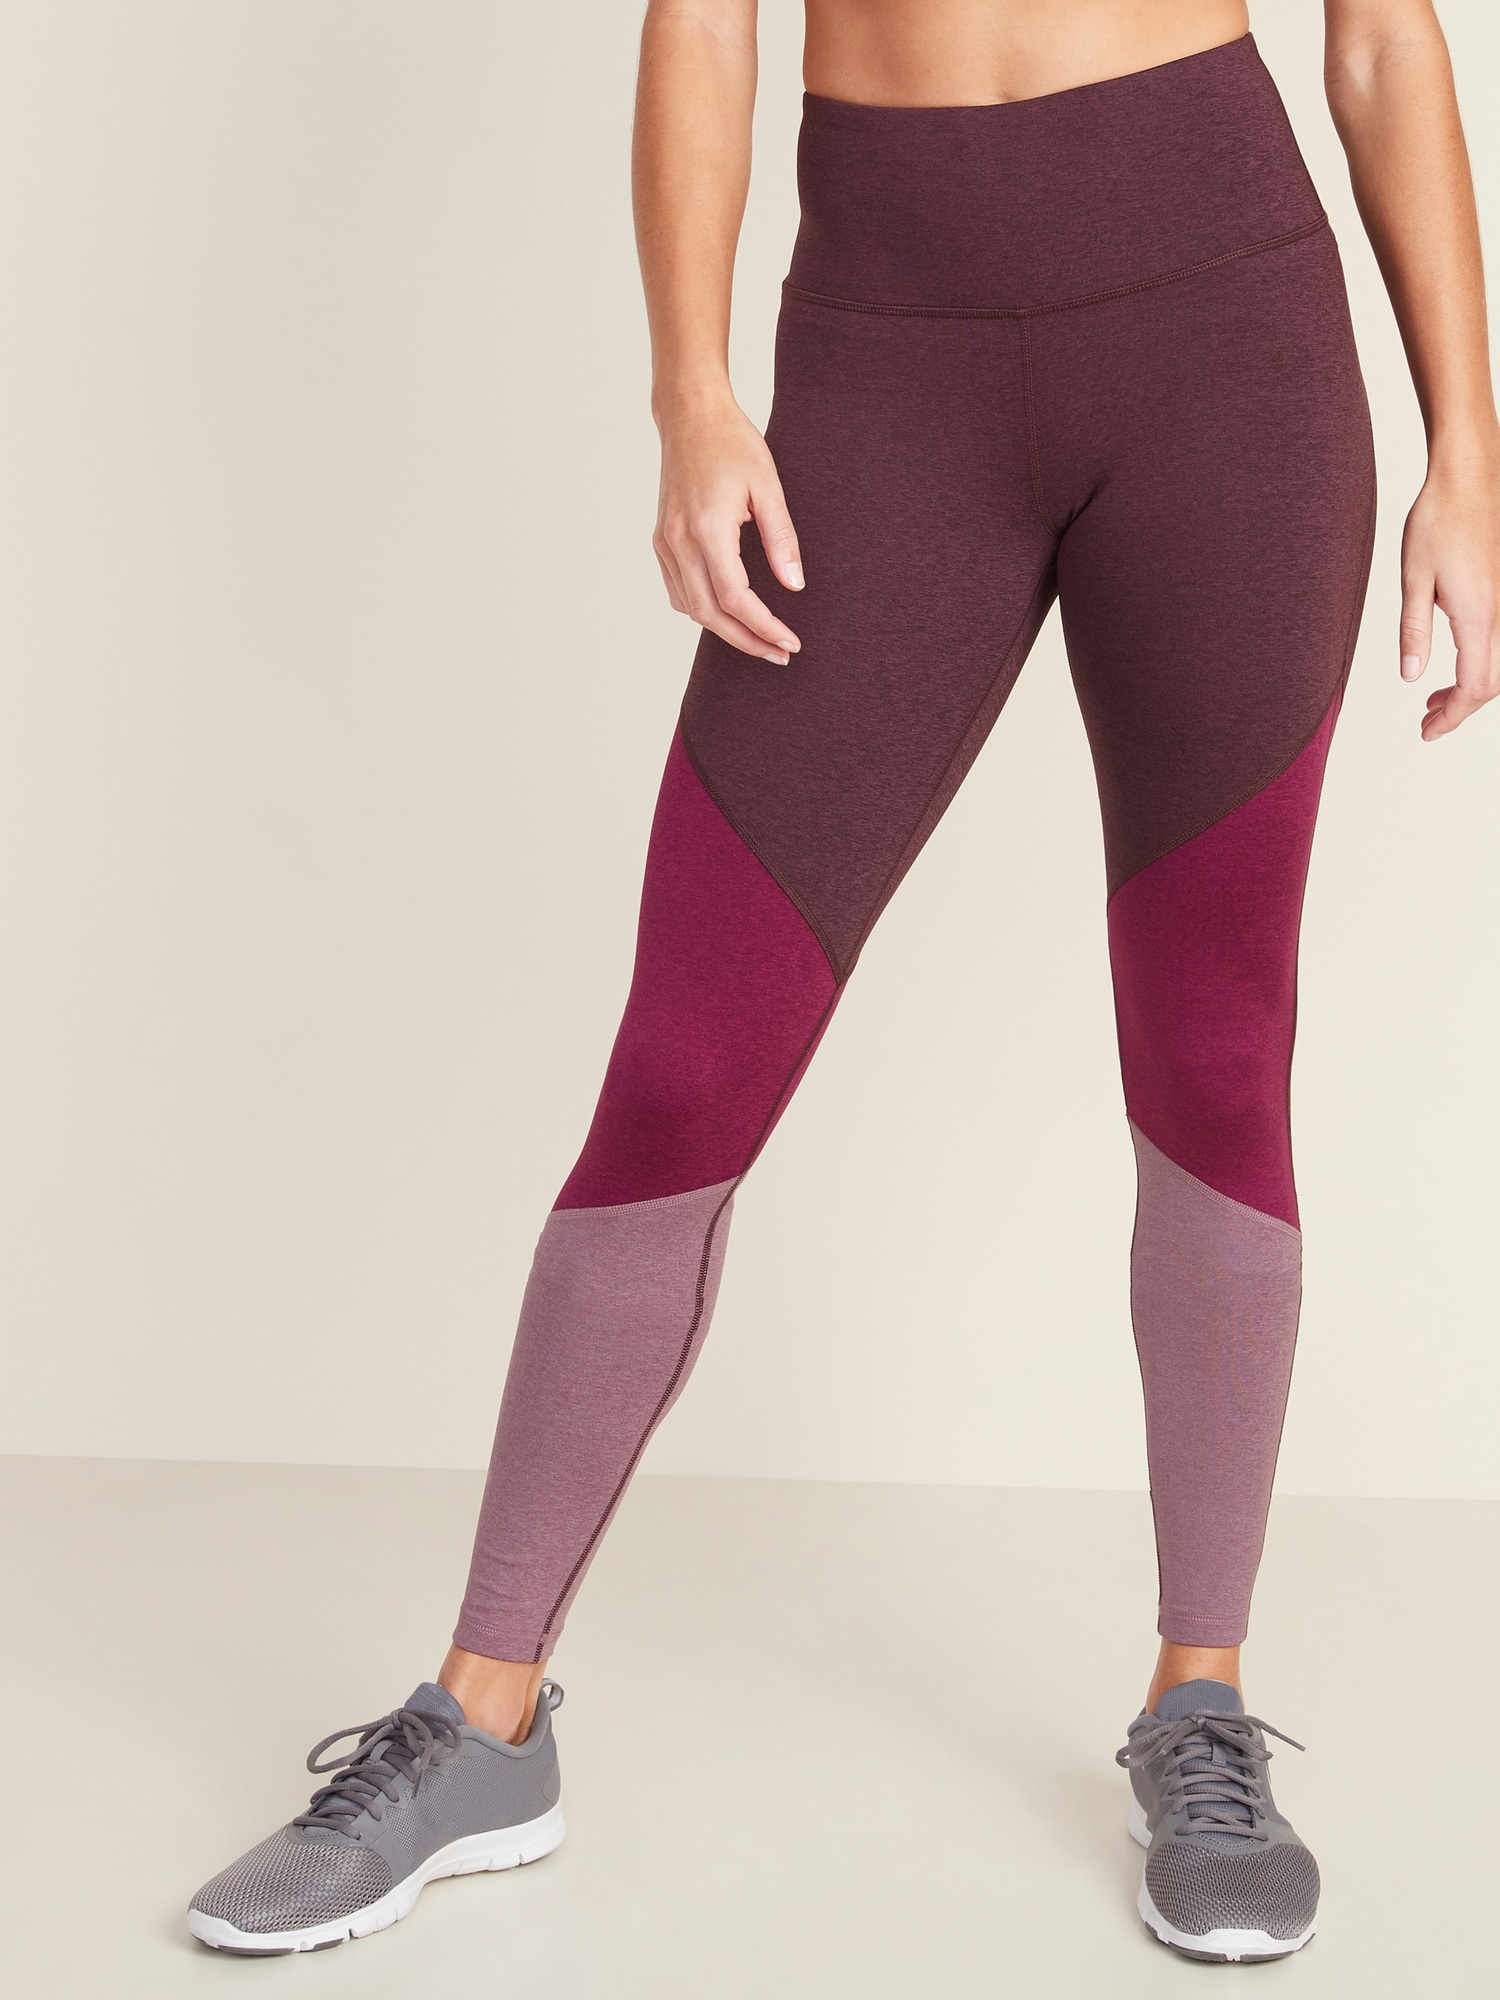 Old Navy High-Waisted Elevate Built-In Sculpt Compression Leggings Gray  Size L - $22 (56% Off Retail) - From chloe